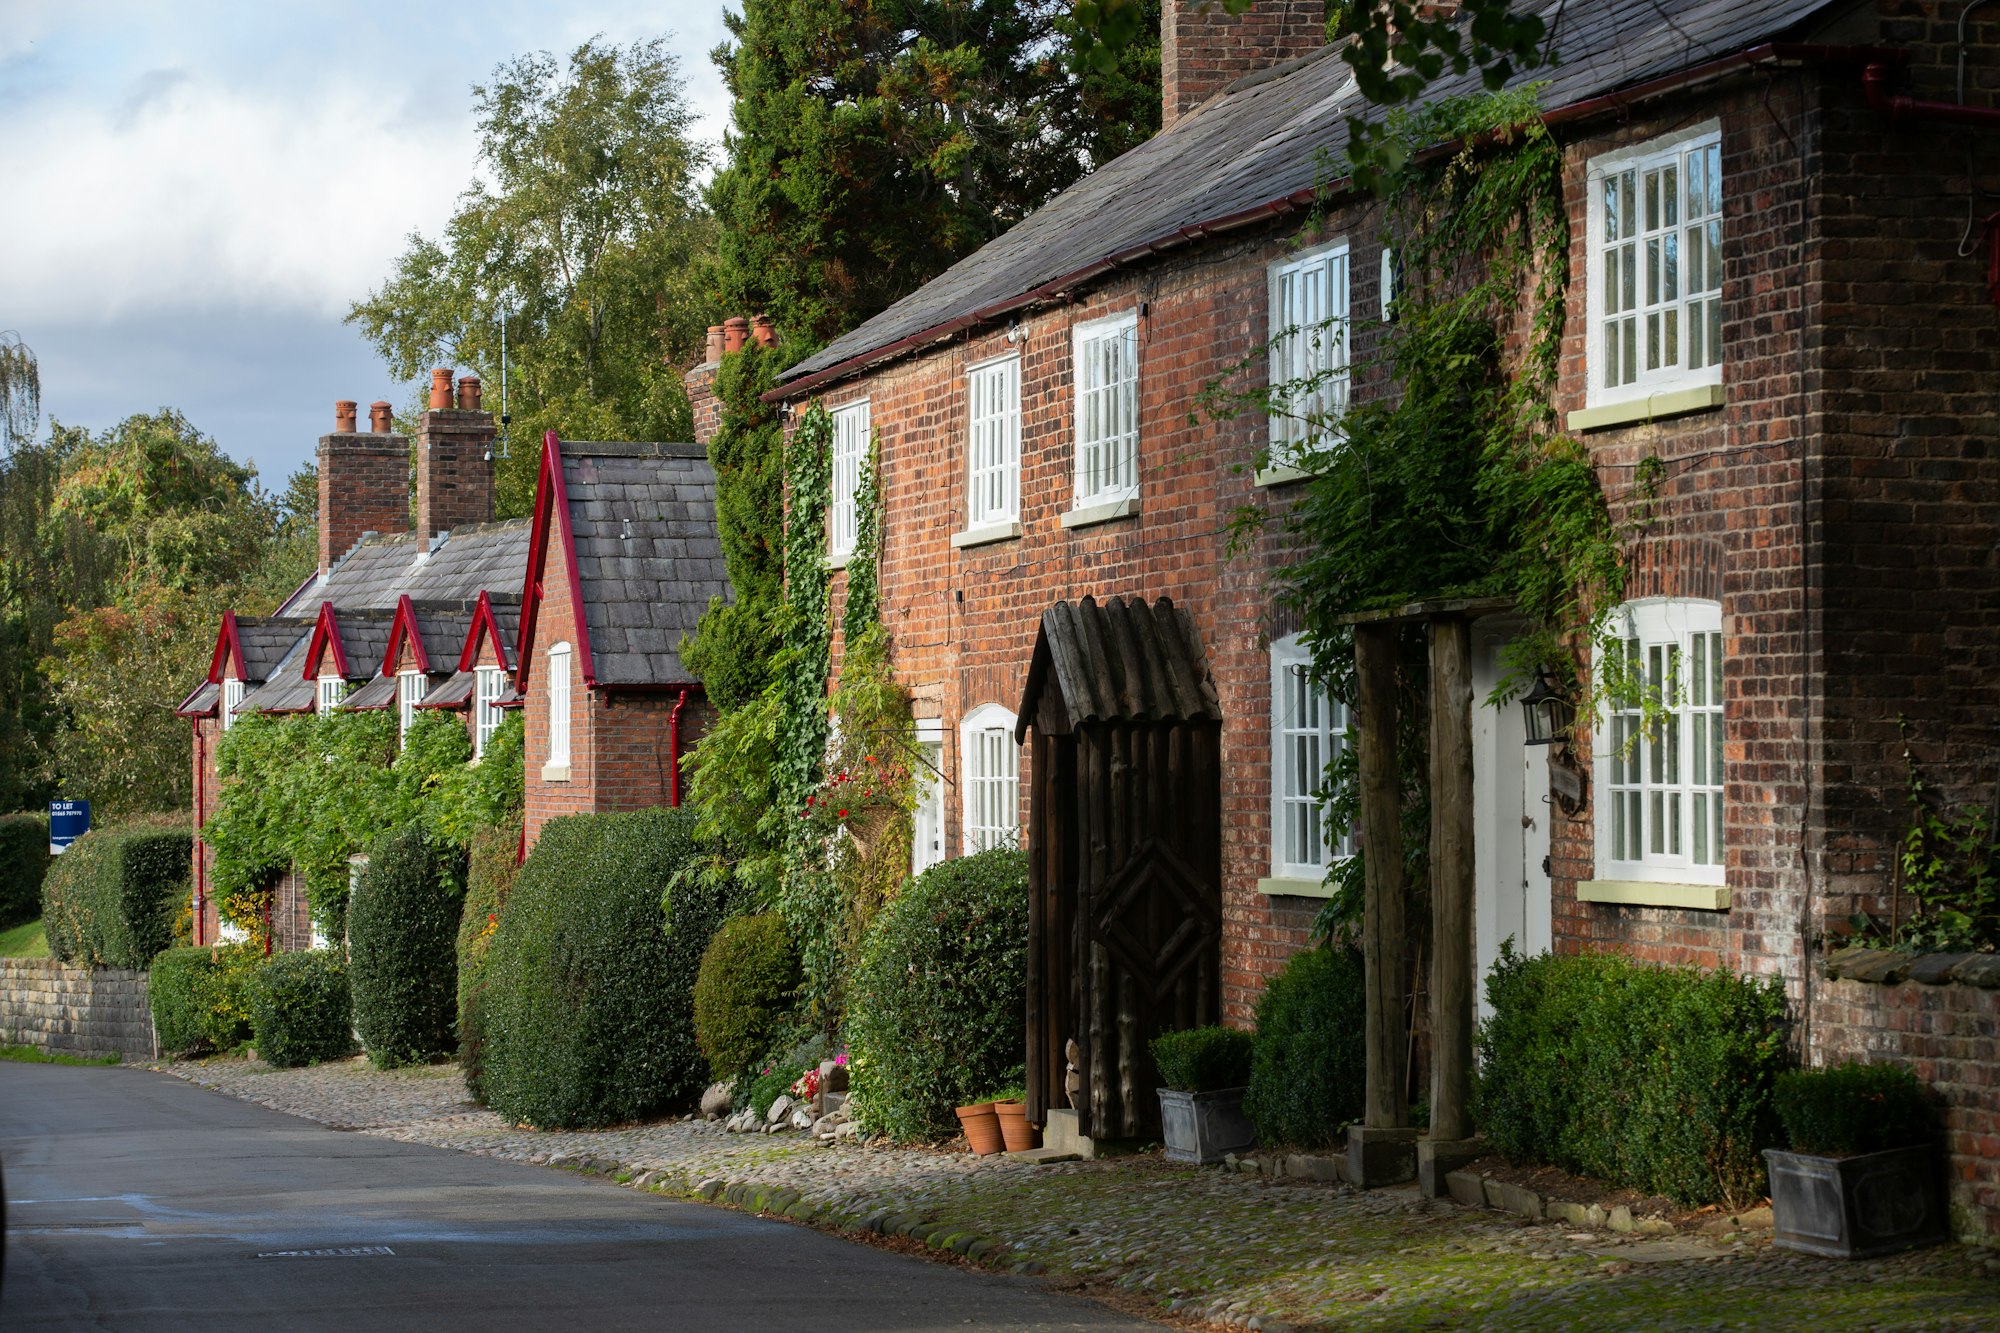 This was part of a shoot for a local estate, the town is of Rostherne in Cheshire is pretty much untouched.